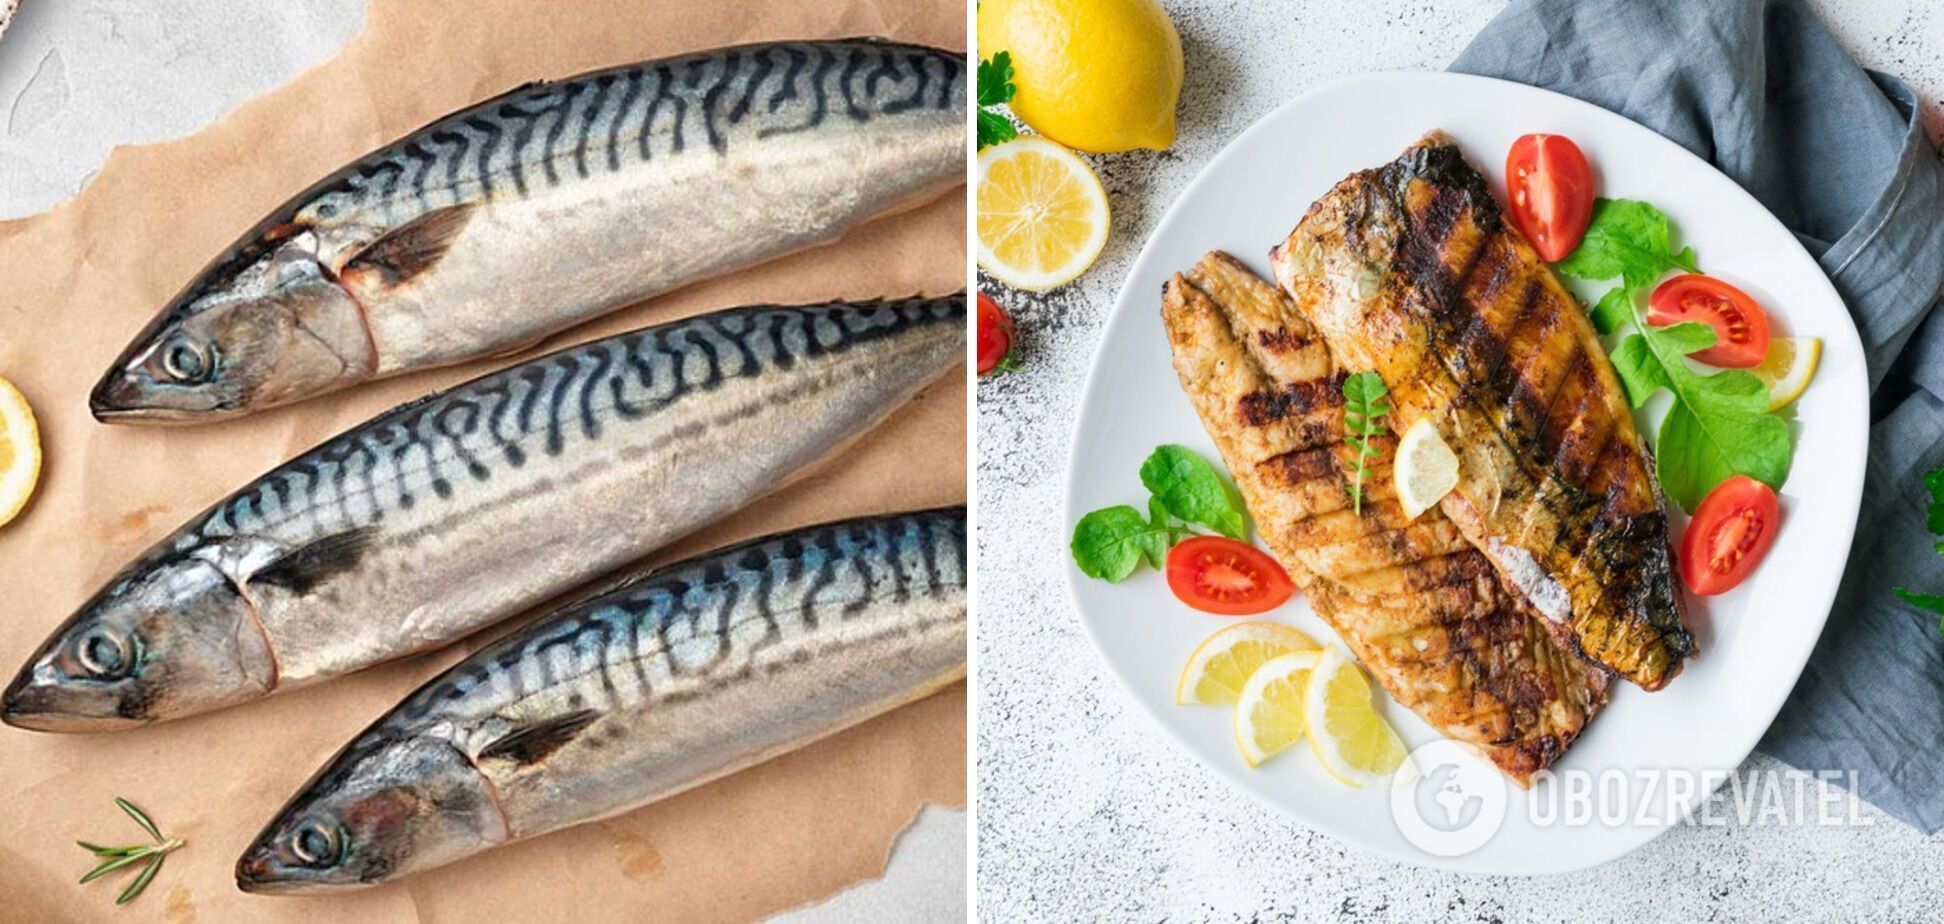 How to cook fish with lemon